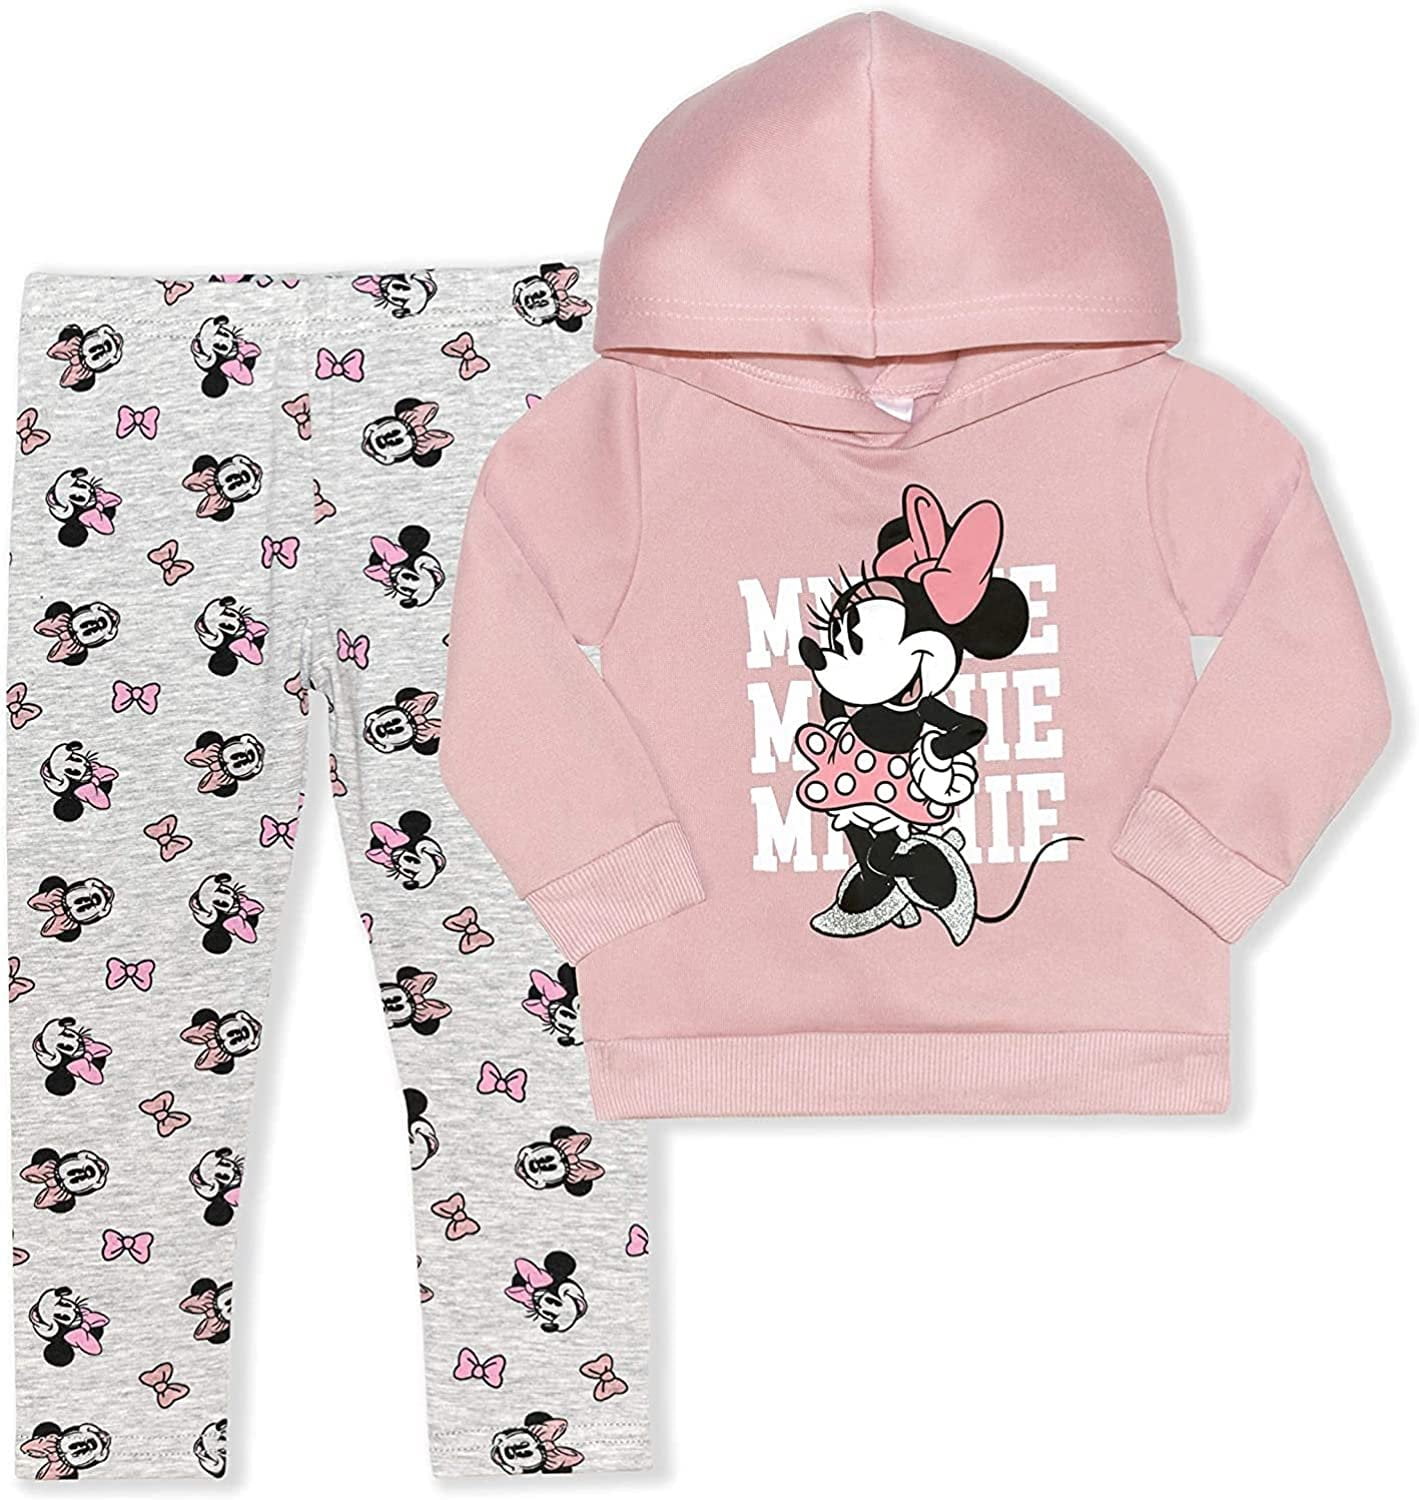 Details about NWT Baby Toddler Girl's DISNEY MINNIE MOUSE Pink Hearts  Sweatshirt 12M 18M 2T Clothing, Shoes & Accessories CA5609734